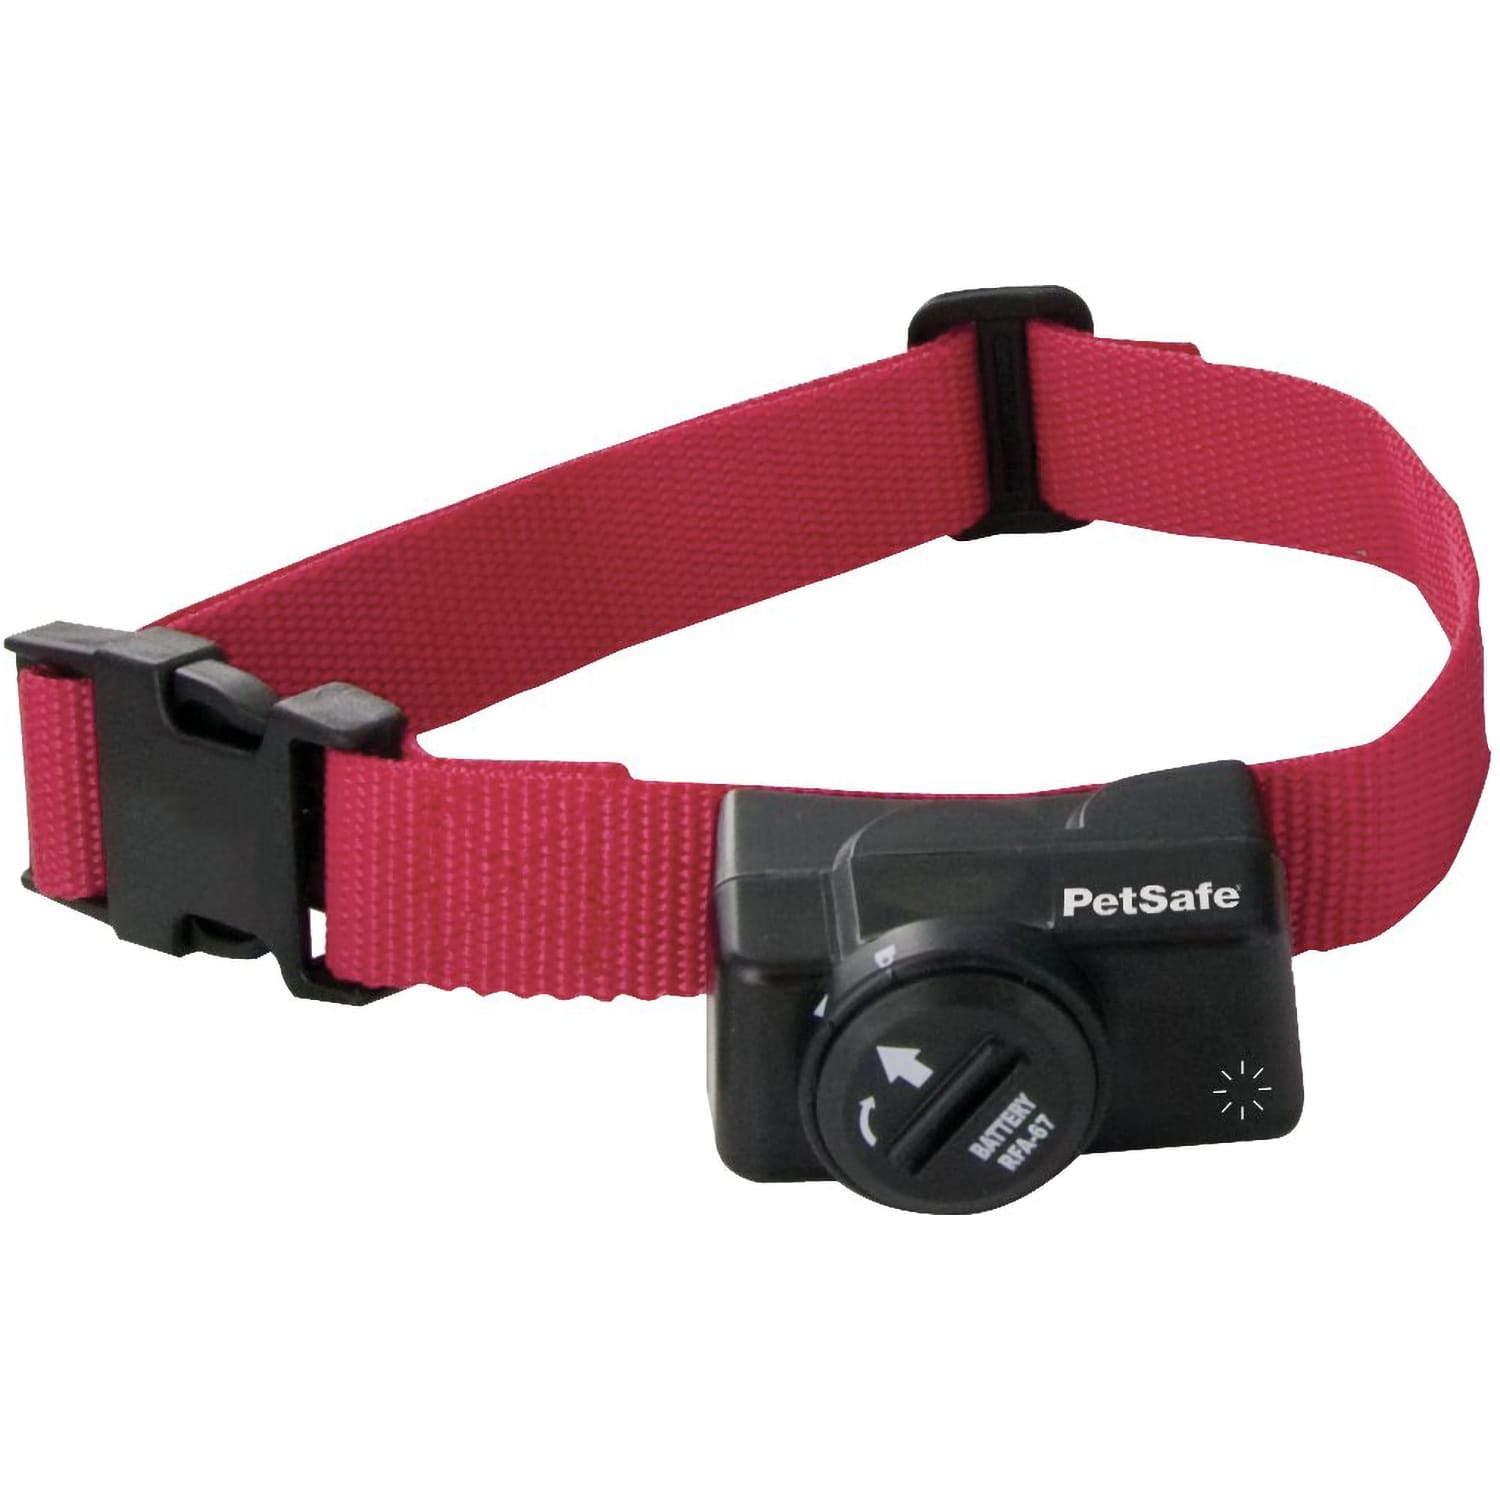 Wireless Pet Containment System Receiver Collar